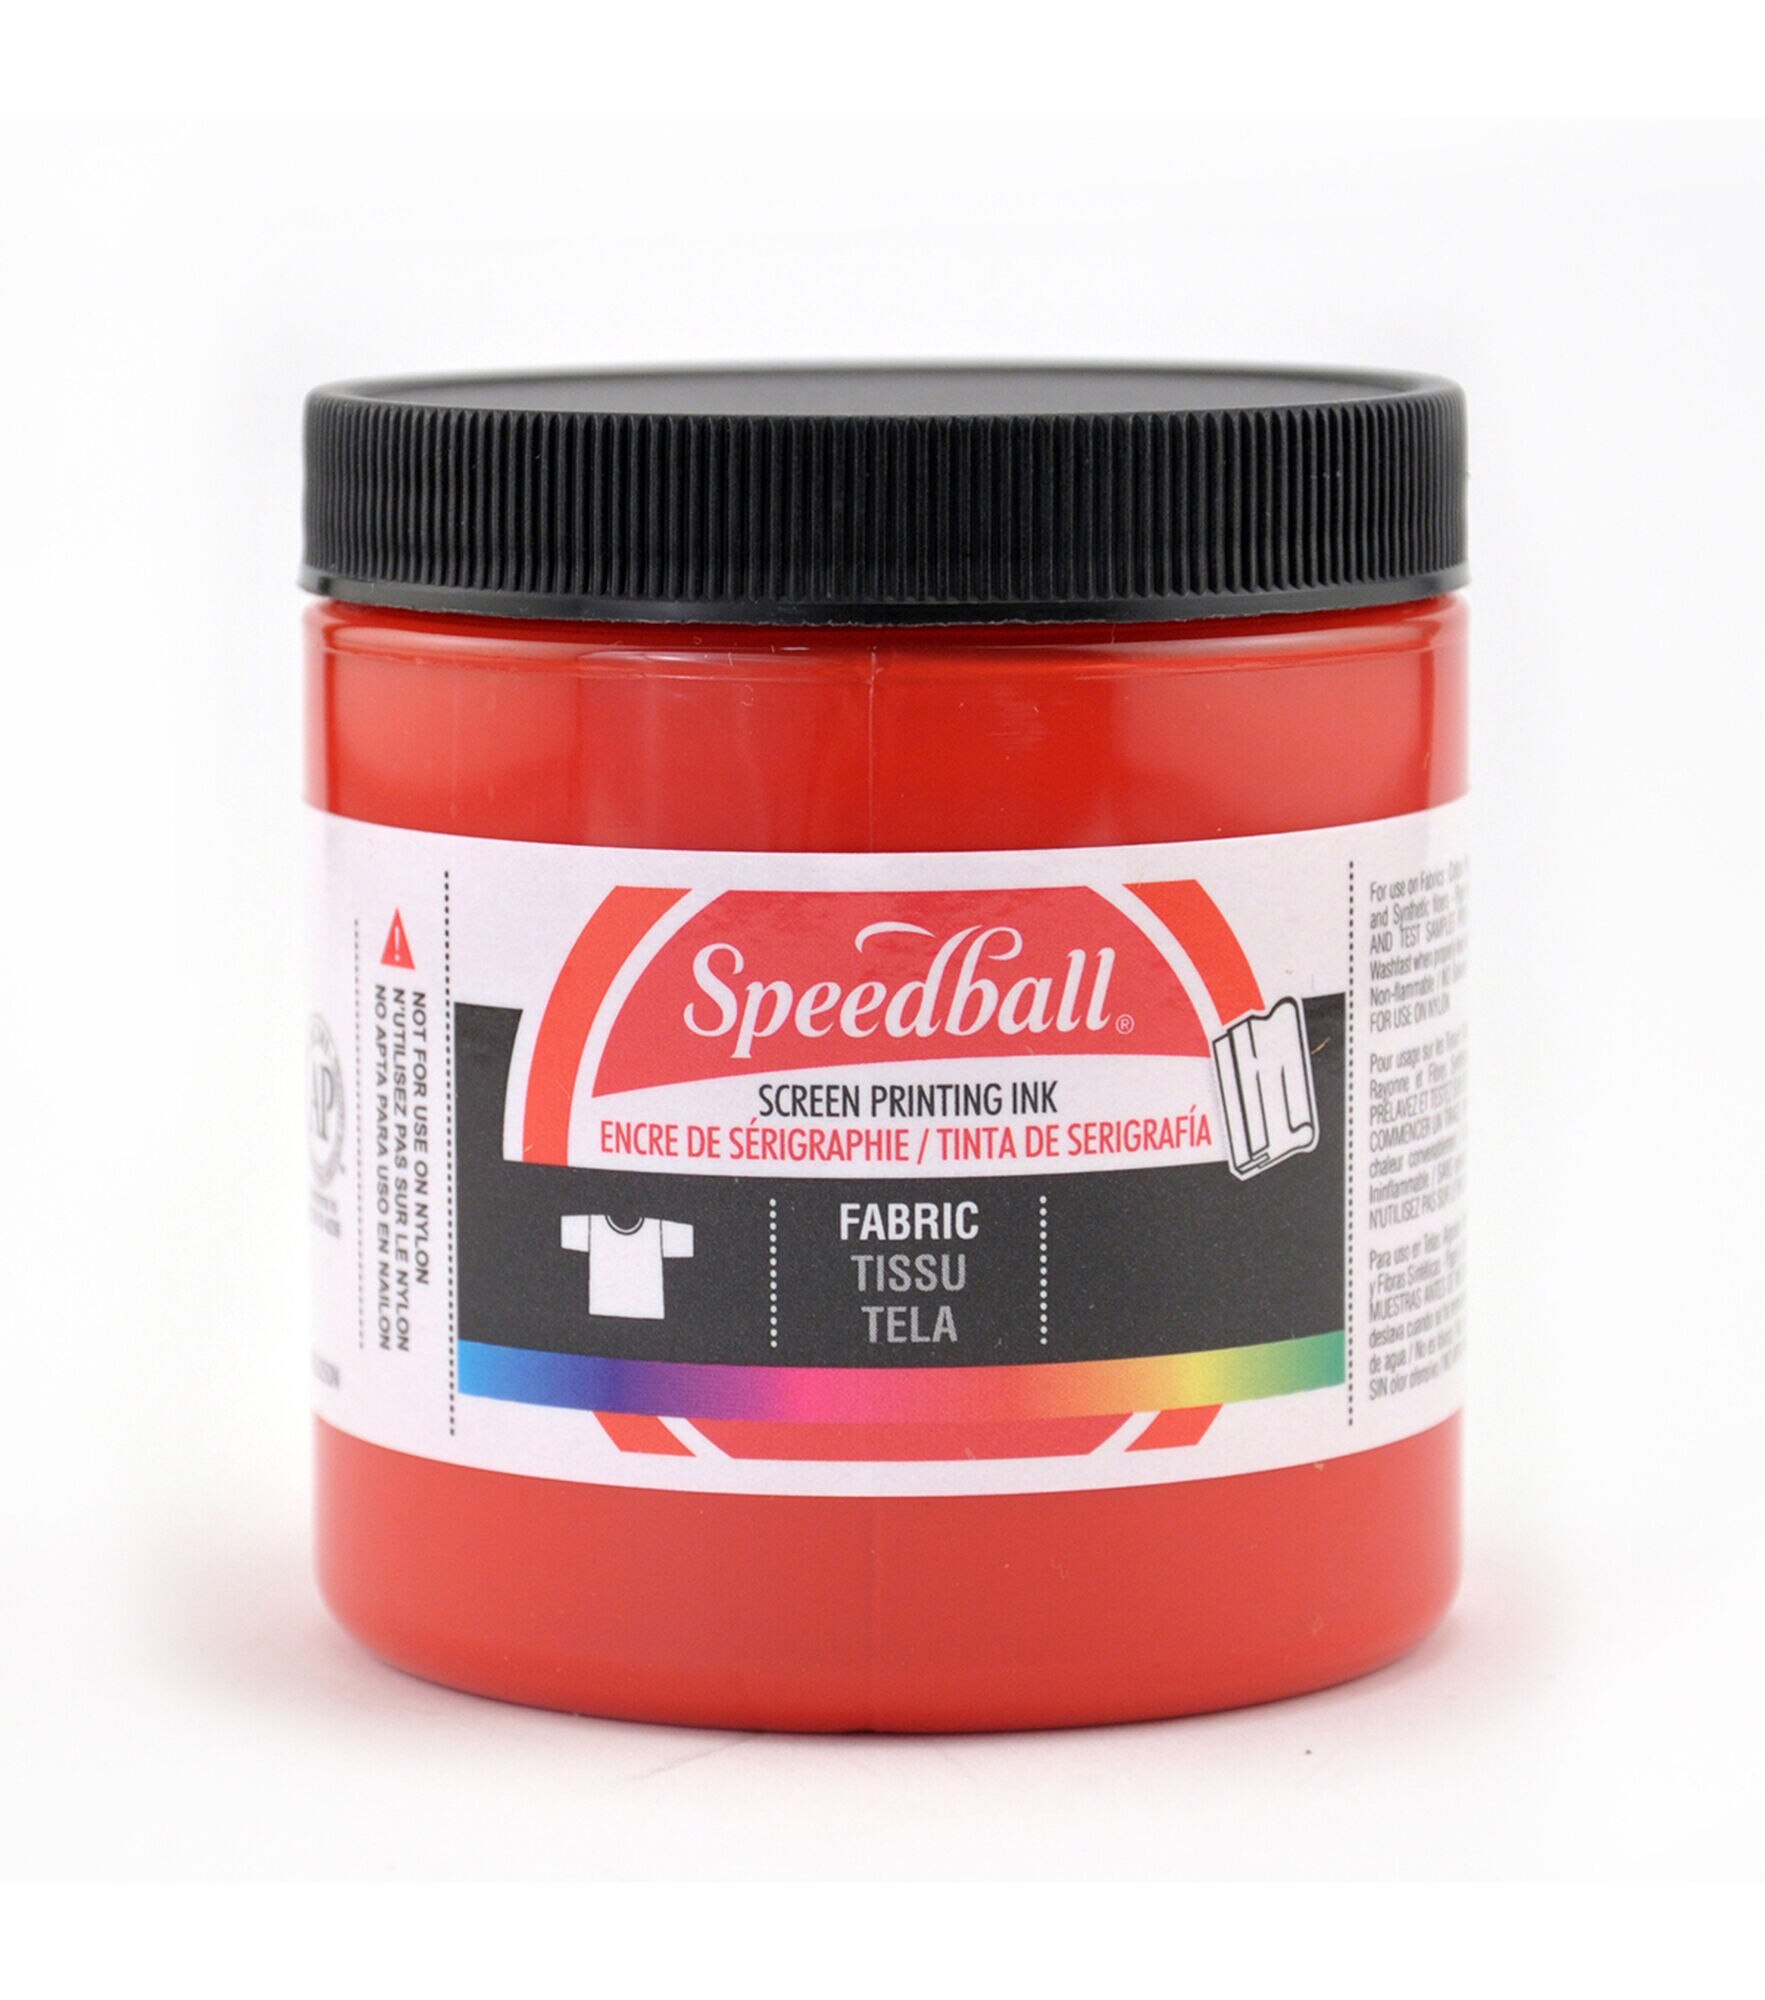 Speedball 8oz Screen Printing Fabric Ink, Red, hi-res